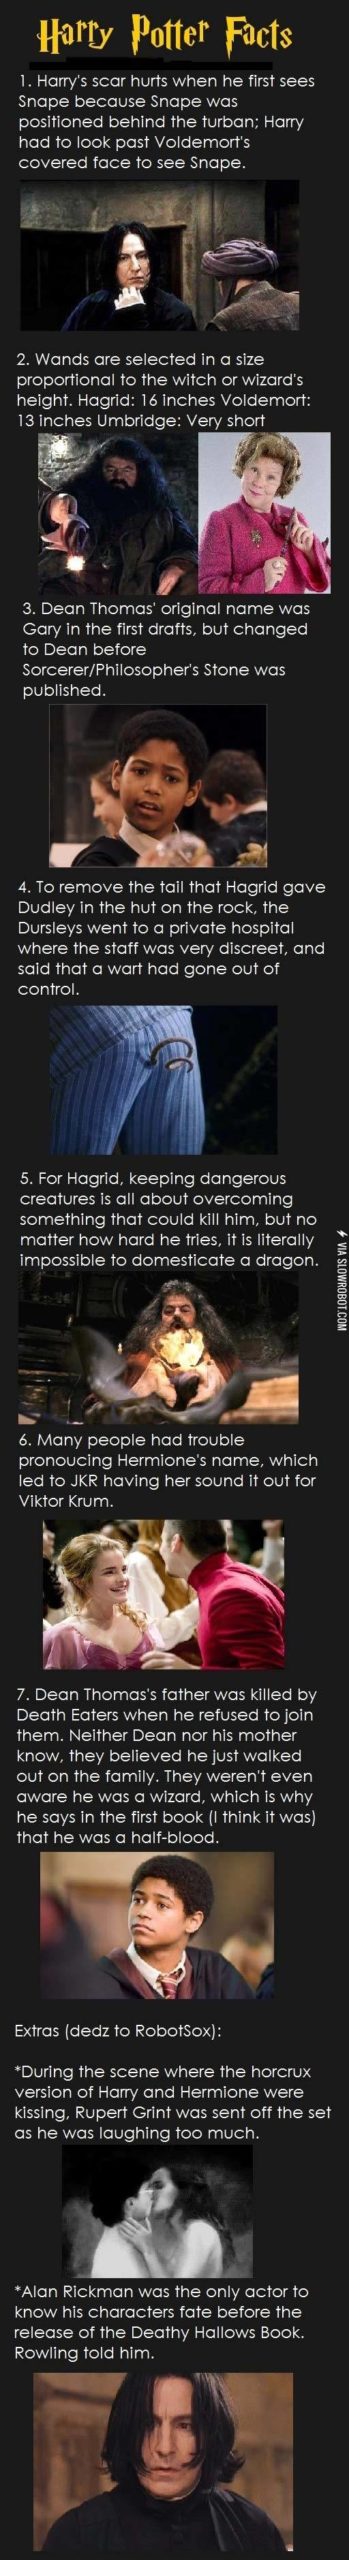 Harry+Potter+facts.